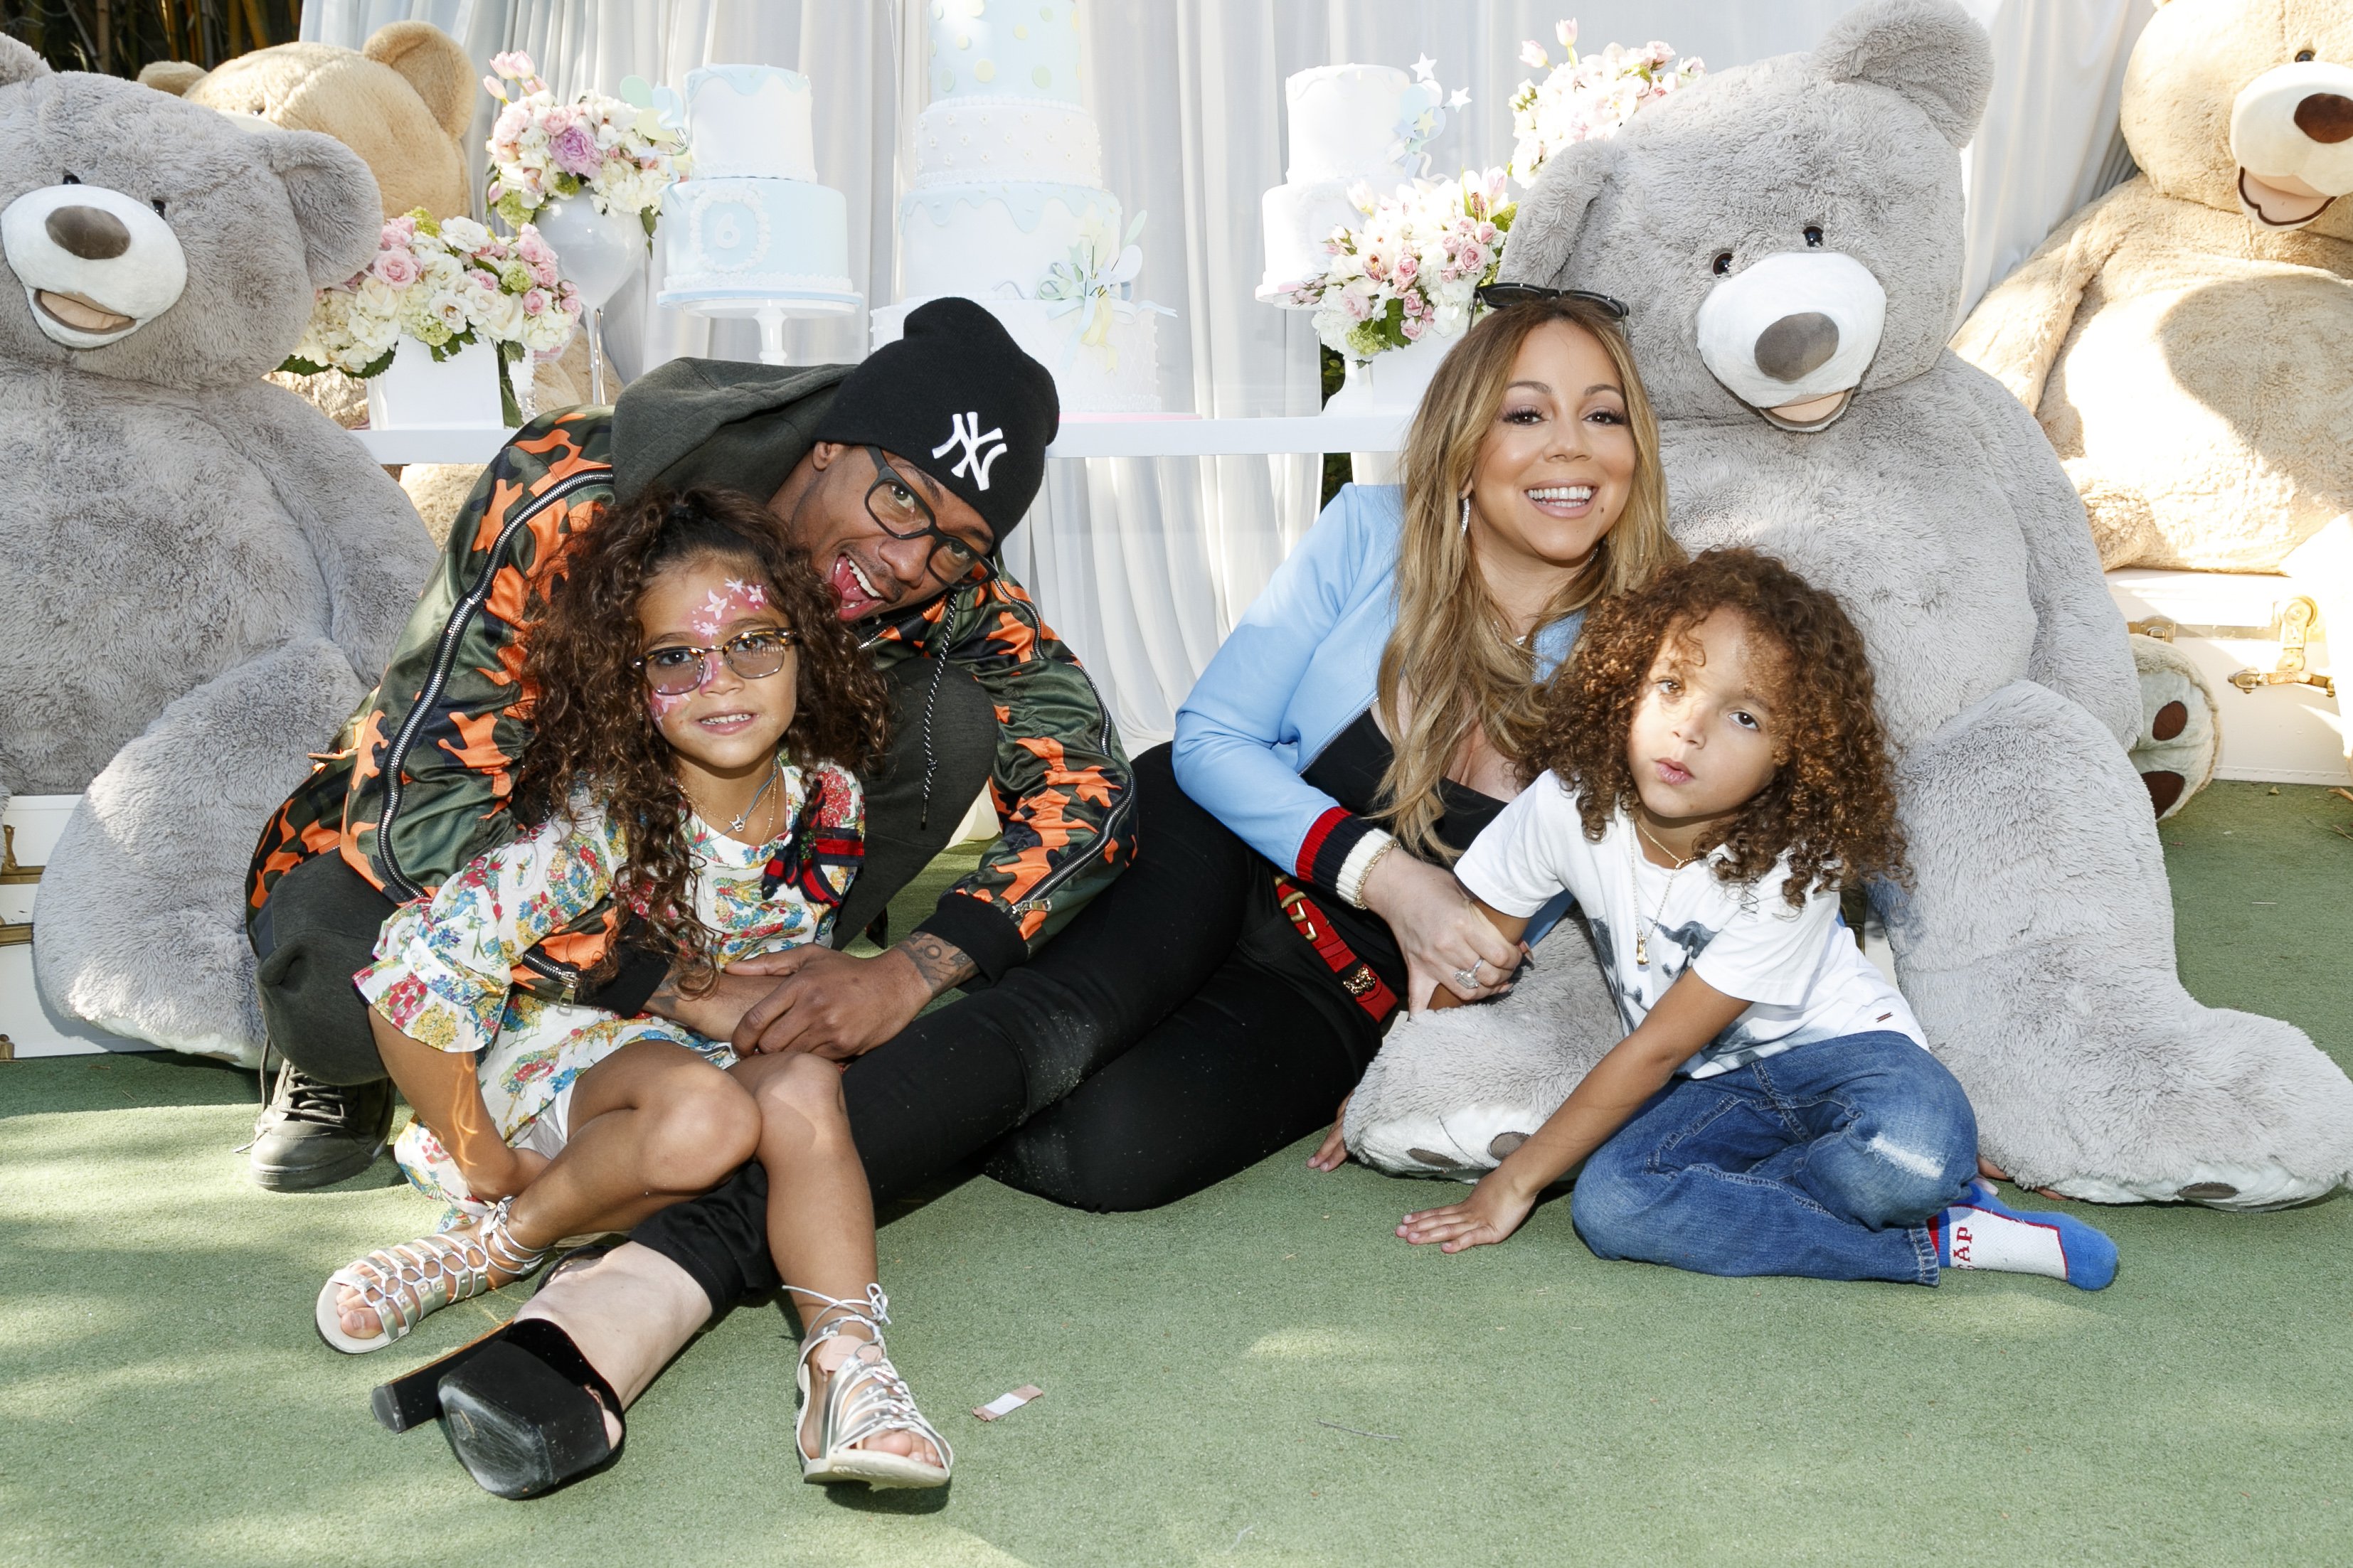 Mariah Carey and Nick Cannon celebrate Monroe and Moroccan's birthday on May 13, 2017, in Los Angeles, California. | Source: Getty Images